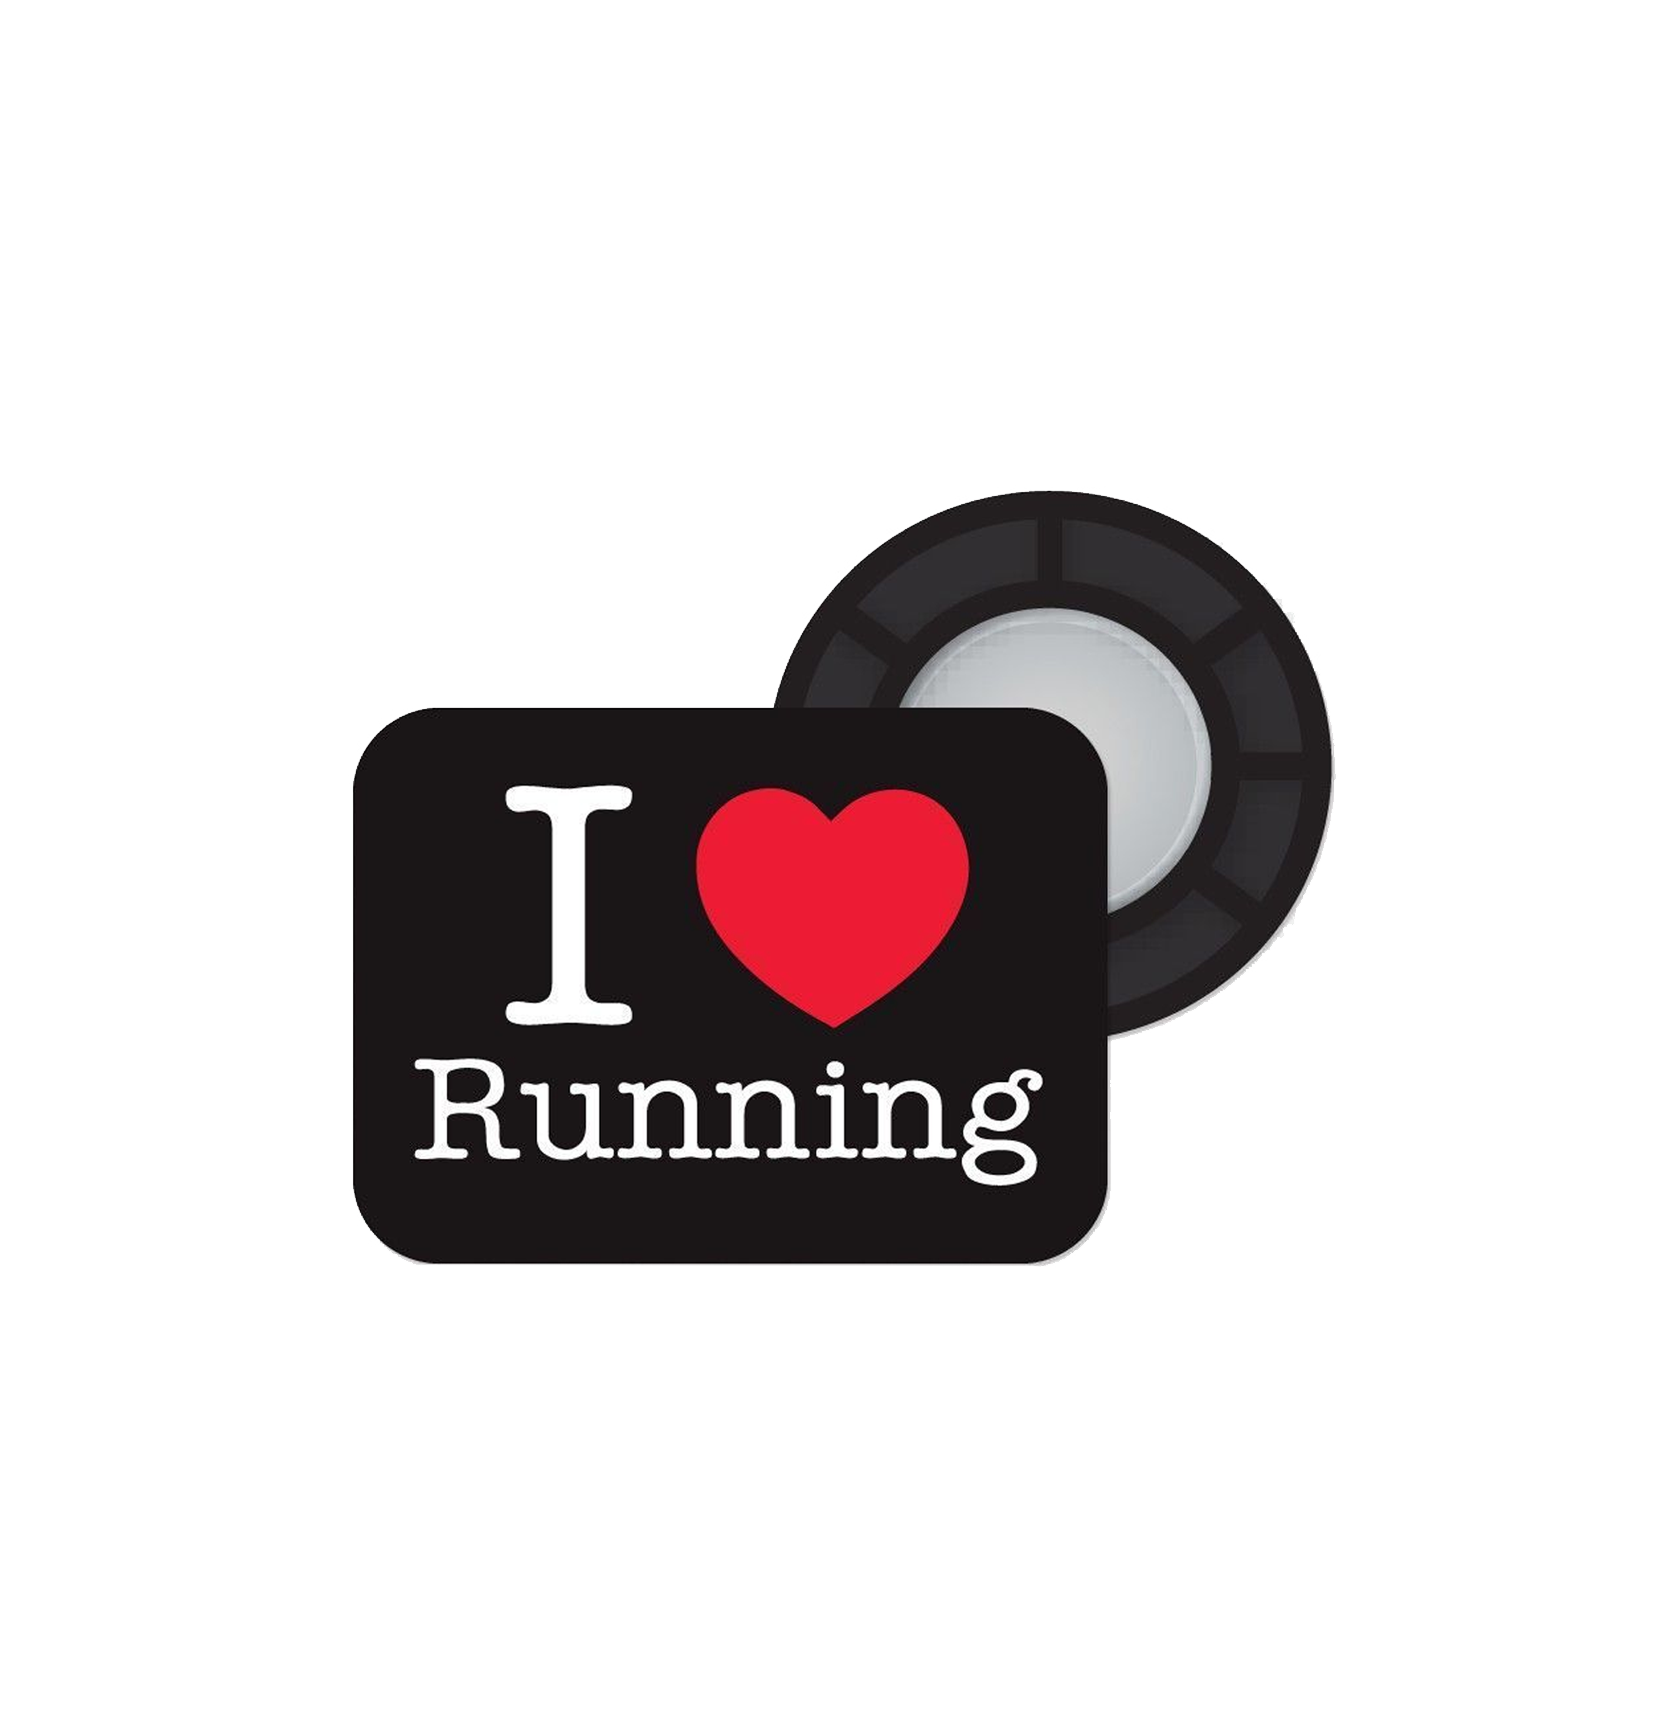 ACCROCHES DOSSARDS MAGNÉTIQUES BIBBITS I LOVE RUNNING